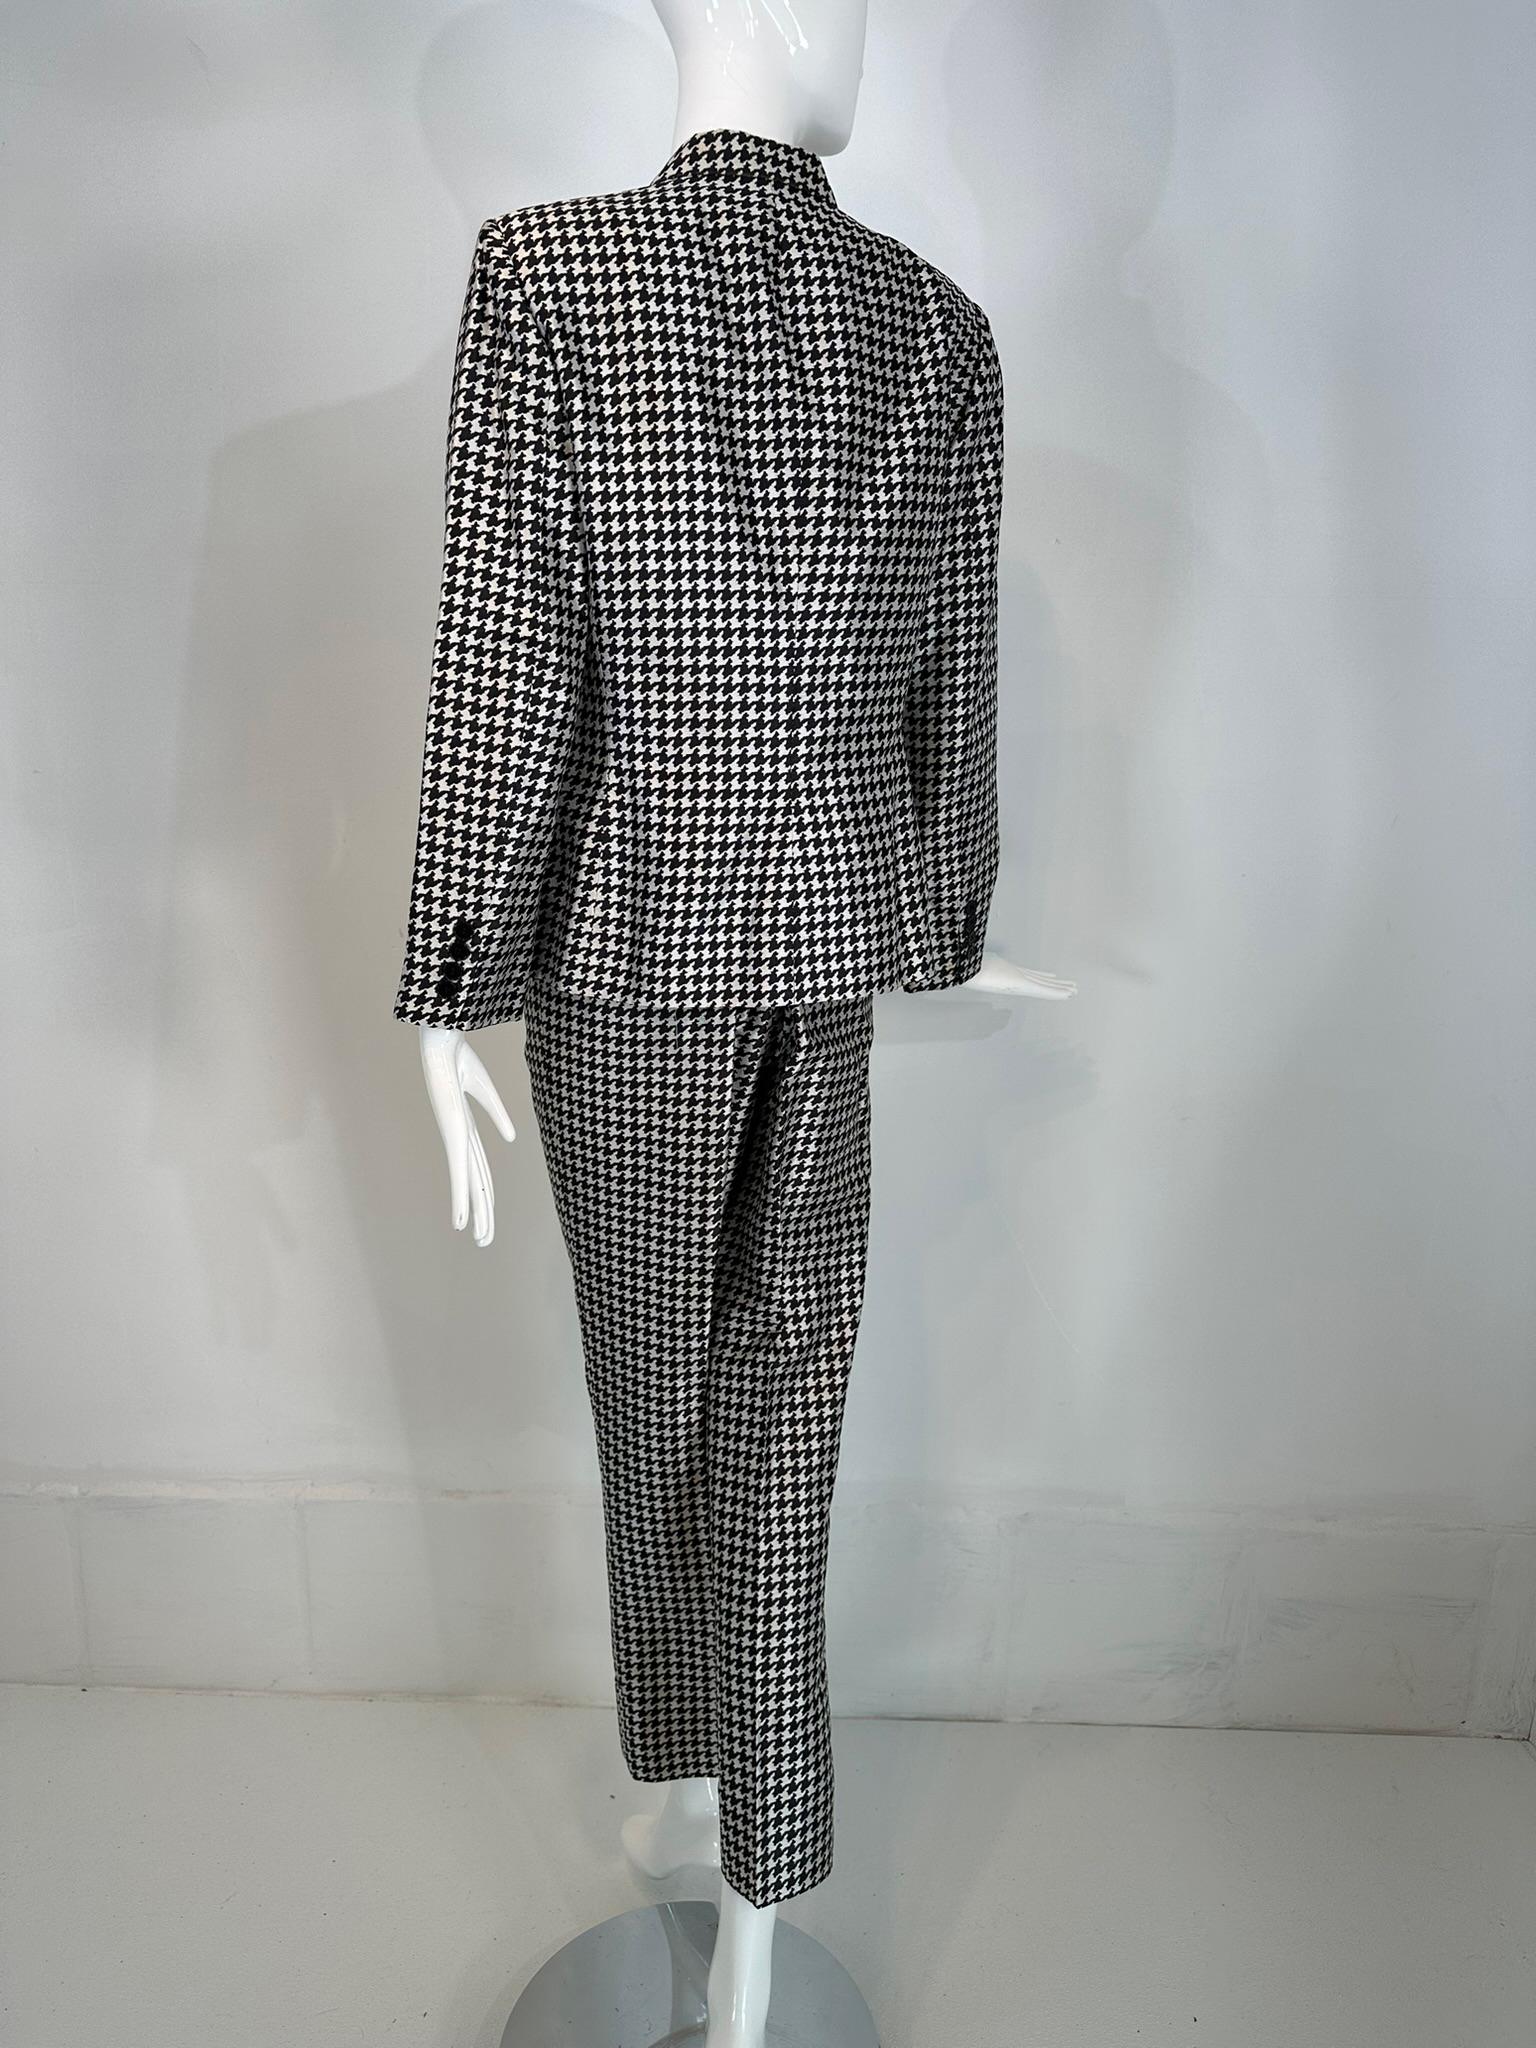 Ralph Lauren Black Label Black & White Silk Hounds Tooth Check Pant Set 10 For Sale 4